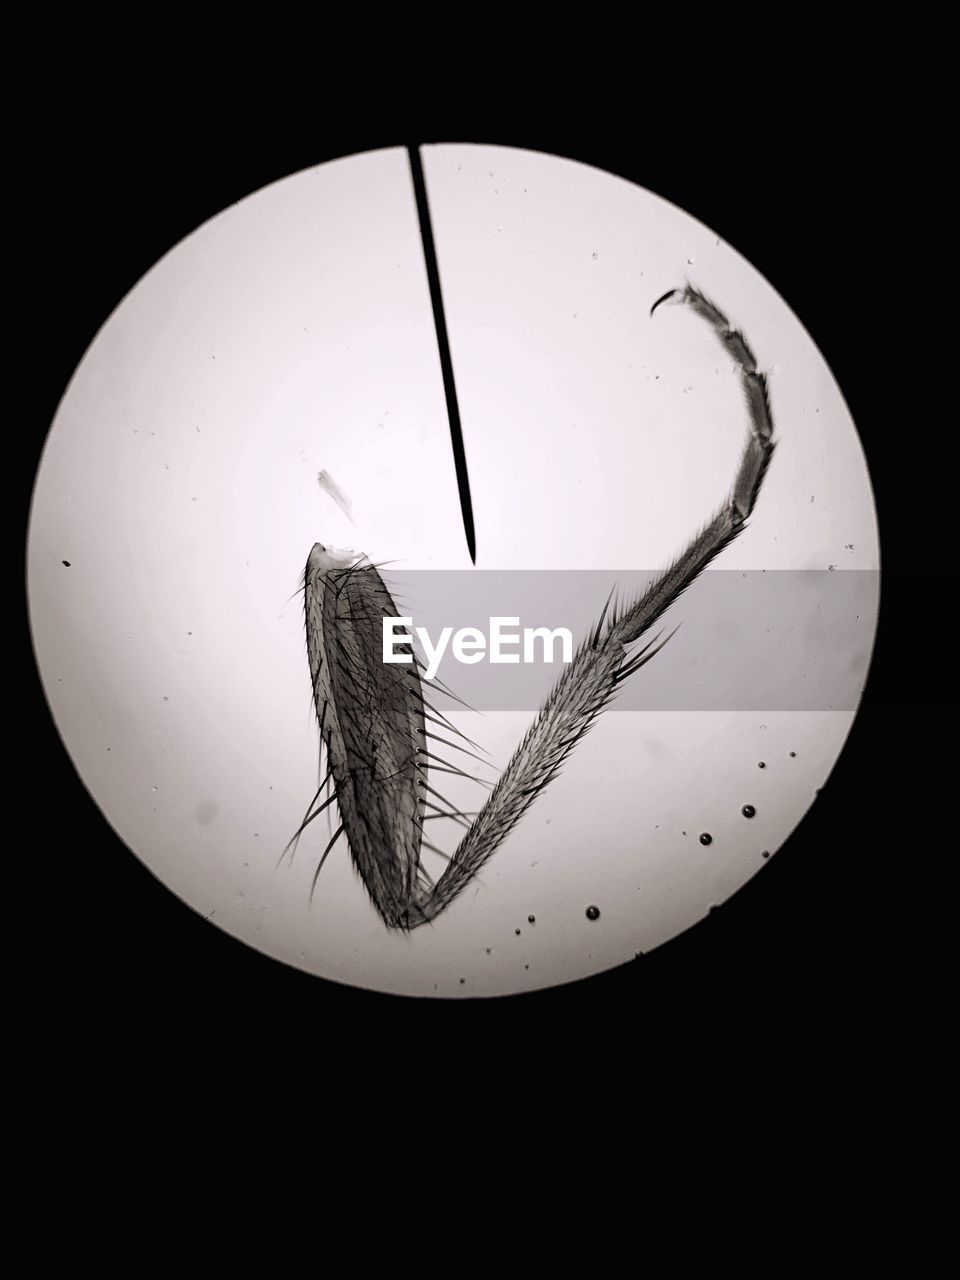 Insect leg and needle seen through microscope